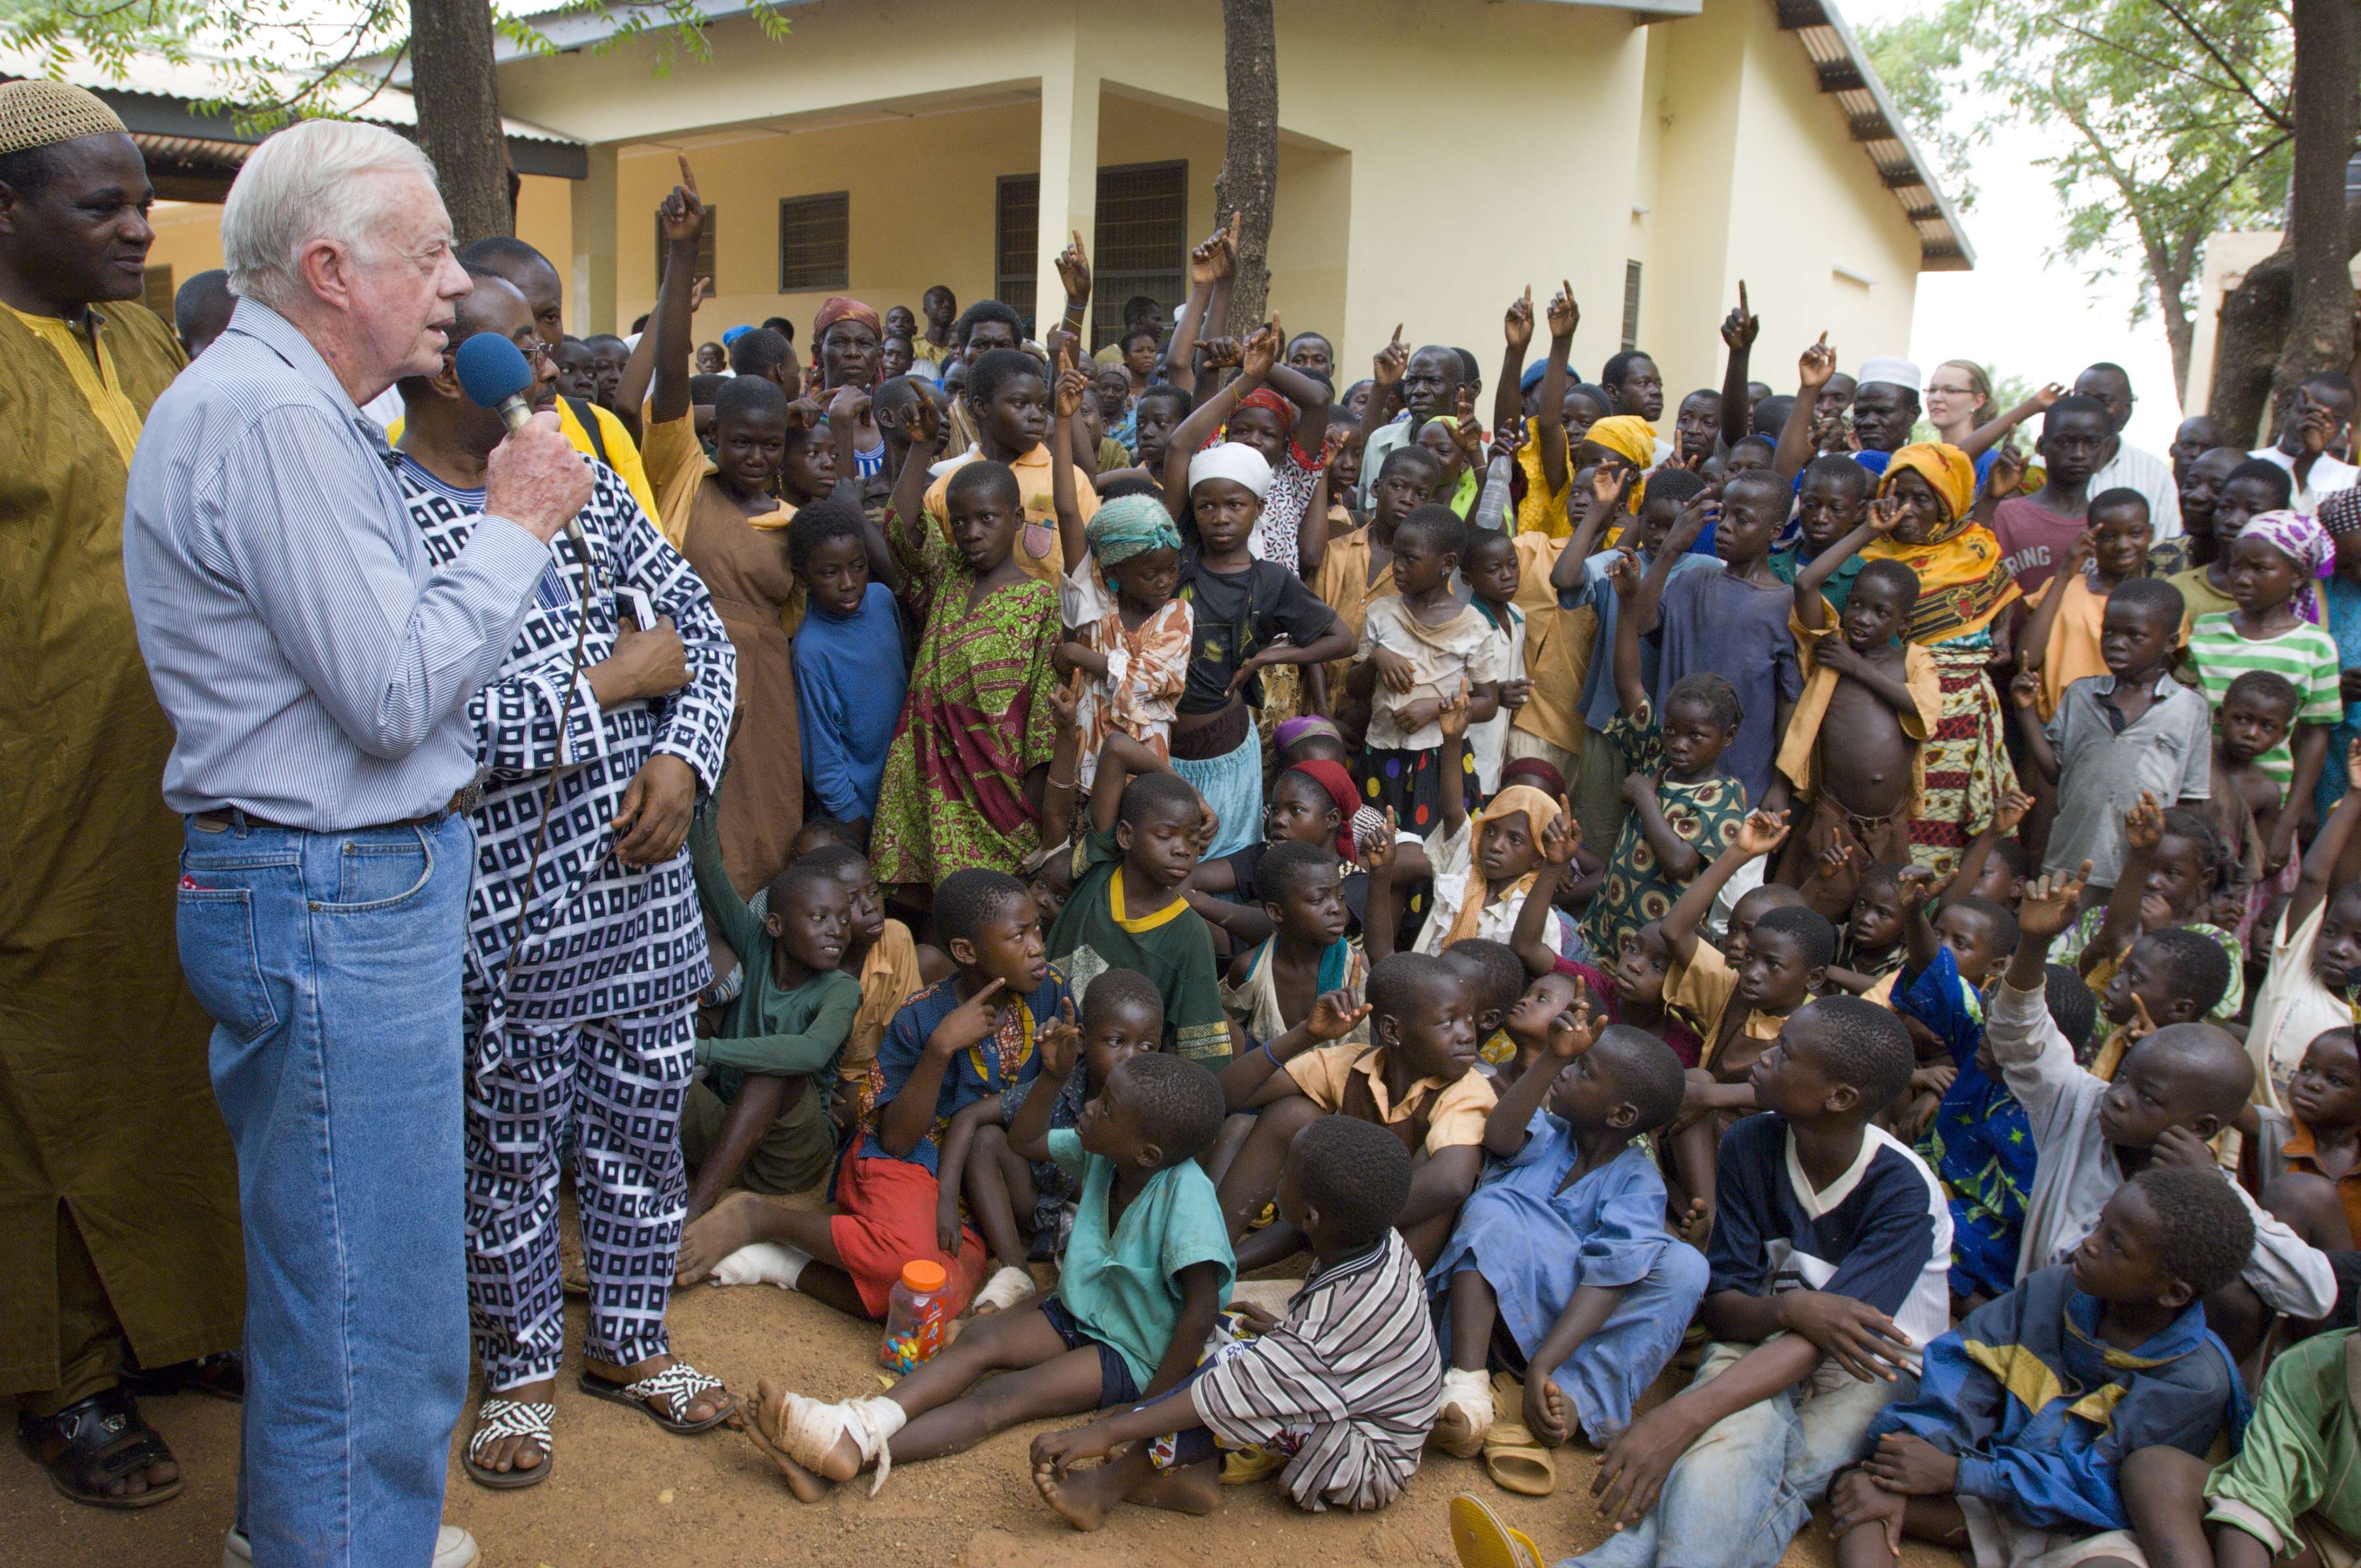 February 8, 2007. Savelugu Hospital, Northern Province, Ghana. President Jimmy Carter and his wife Rosalynn address Savelugu children on the seriousness of eradicating guinea worm disease. In this photo he has said "Hands up all those who have had Guinea Worm" and many of the children put up their hands.